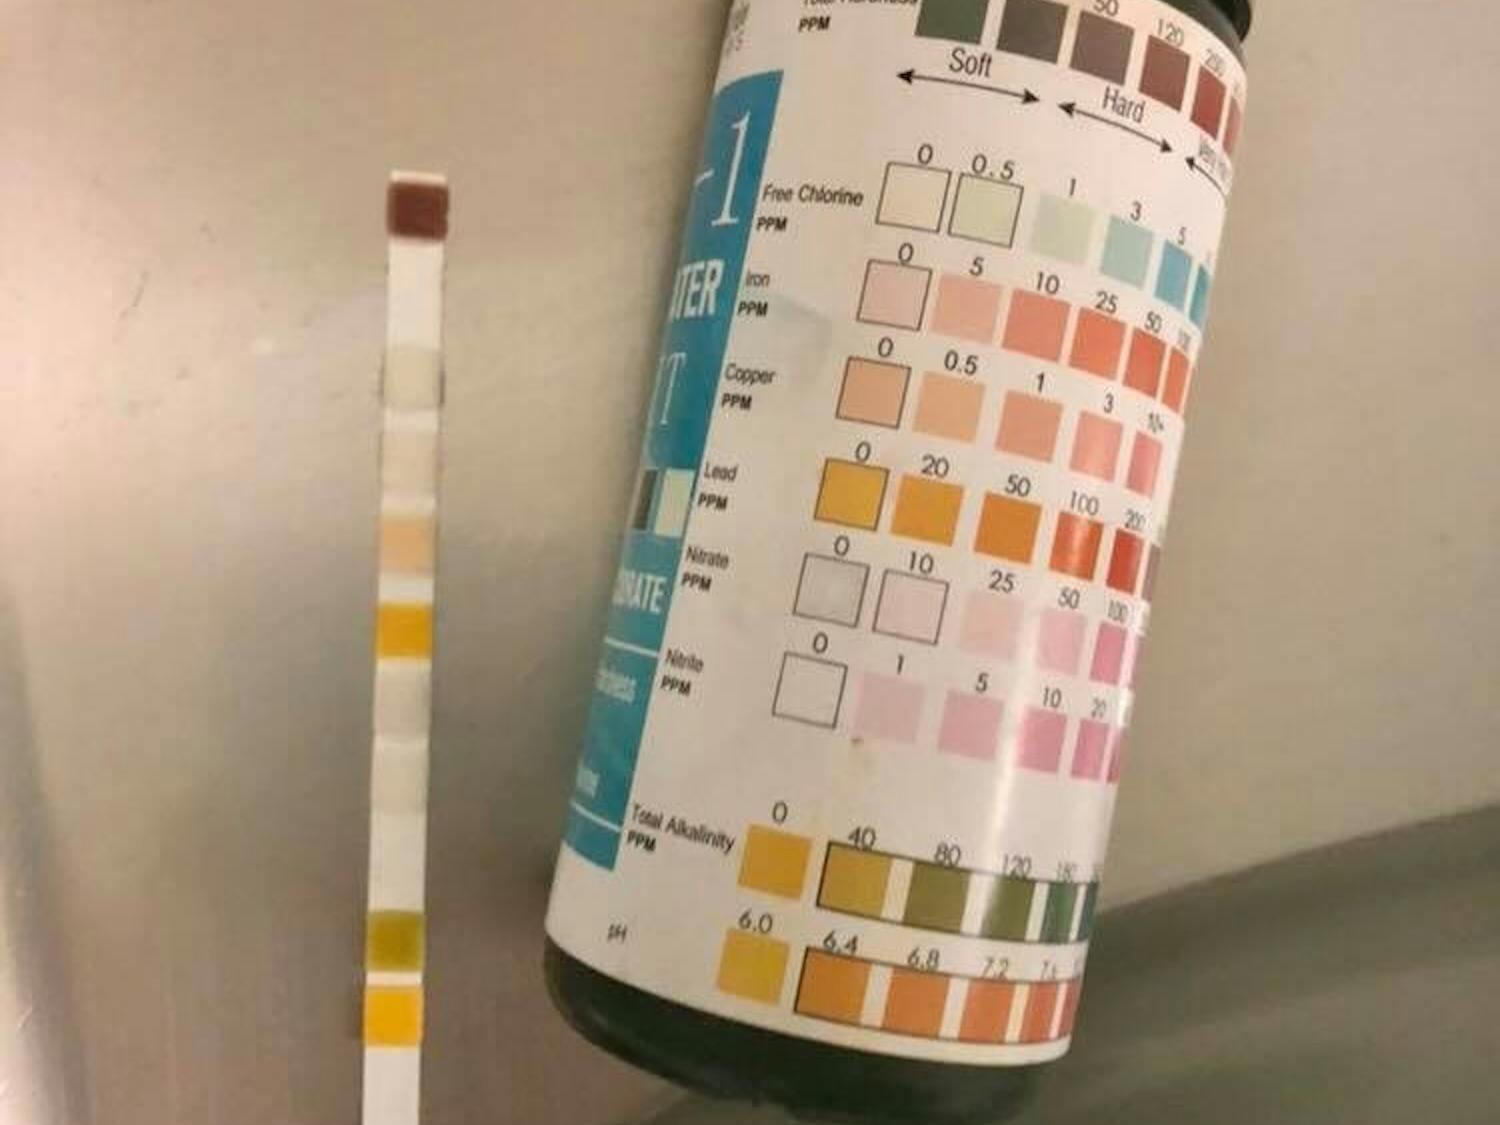 The Spectrum used dipsticks to test the water quality of 94 fountains around campus. The testing sticks featured nine chemical pads that changed colors after reacting with compounds in drinking water, indicating the quality of water at UB.